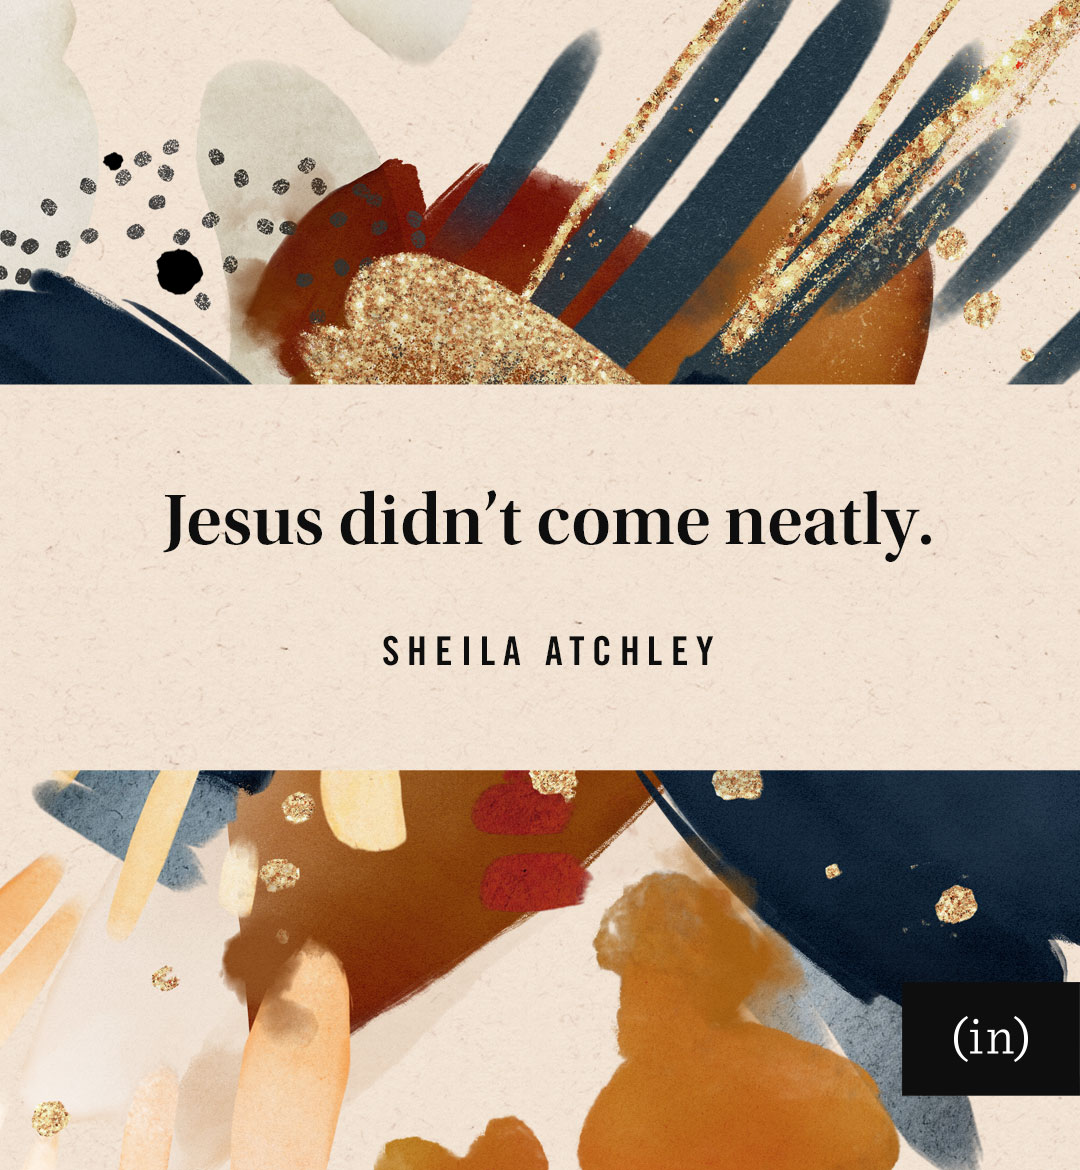 Jesus didn’t come neatly.